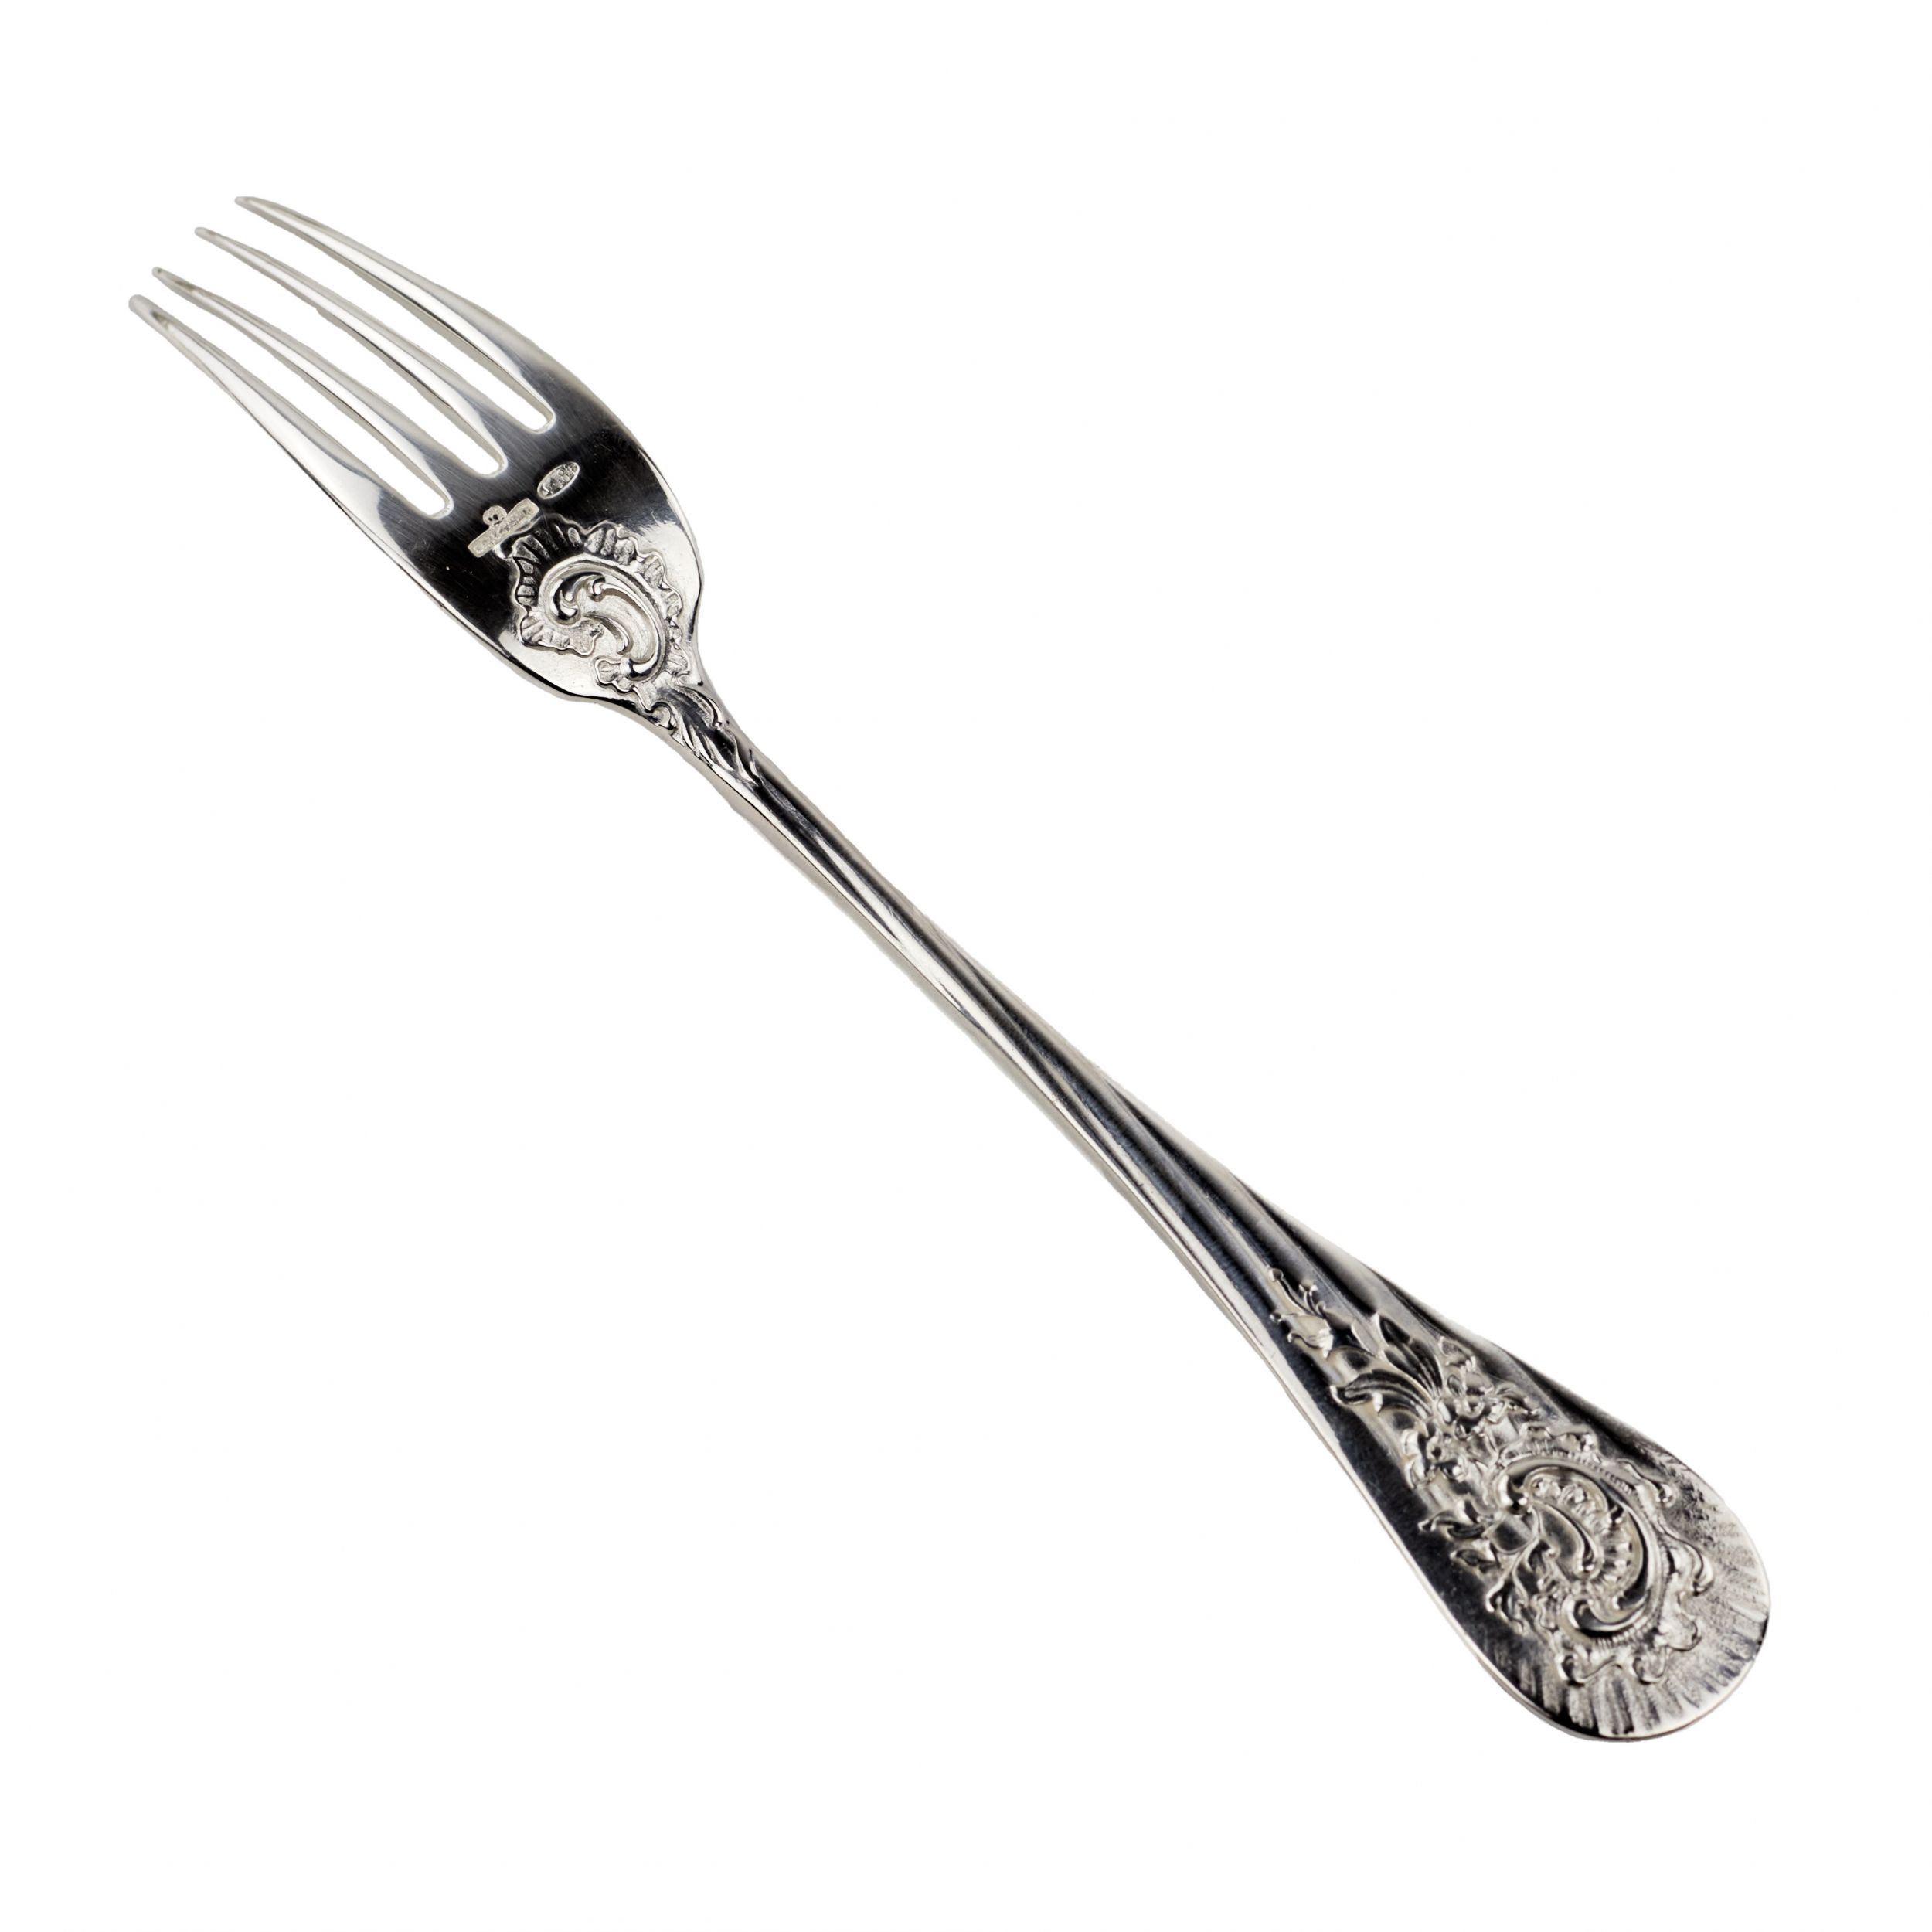 Silverware set for 6 persons. Ivan Khlebnikov. - Image 10 of 16